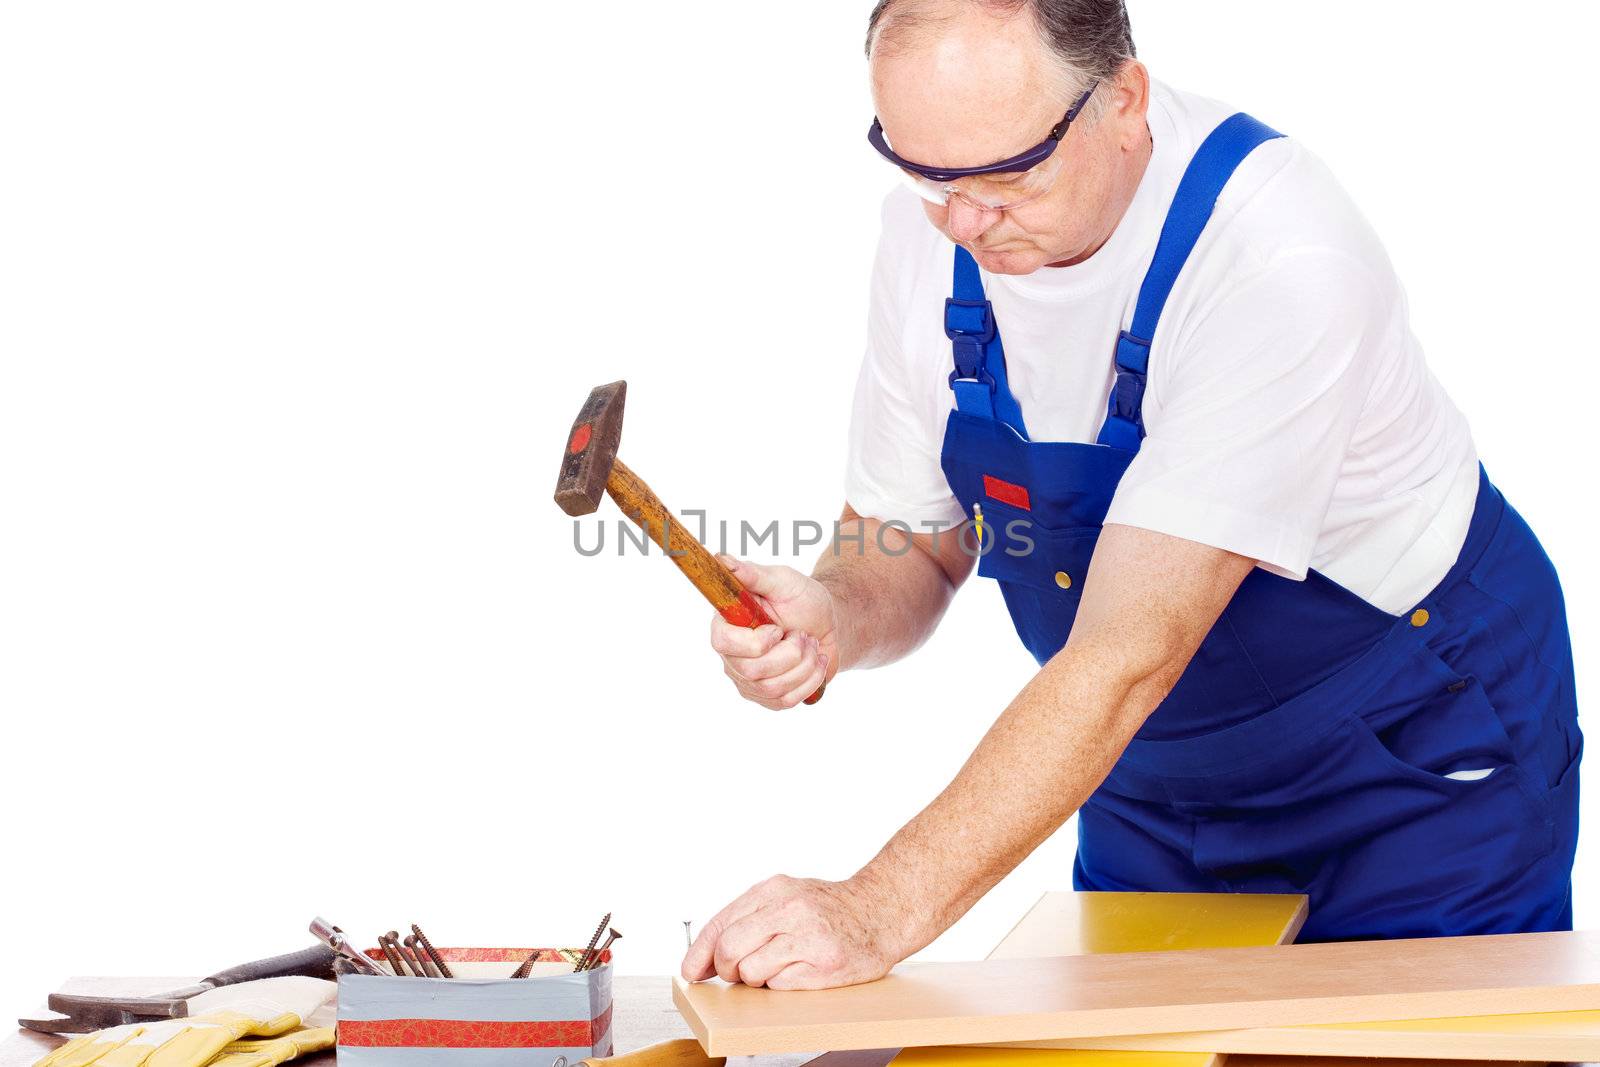 Middle age worker knocking the nail in board, isolated on white background